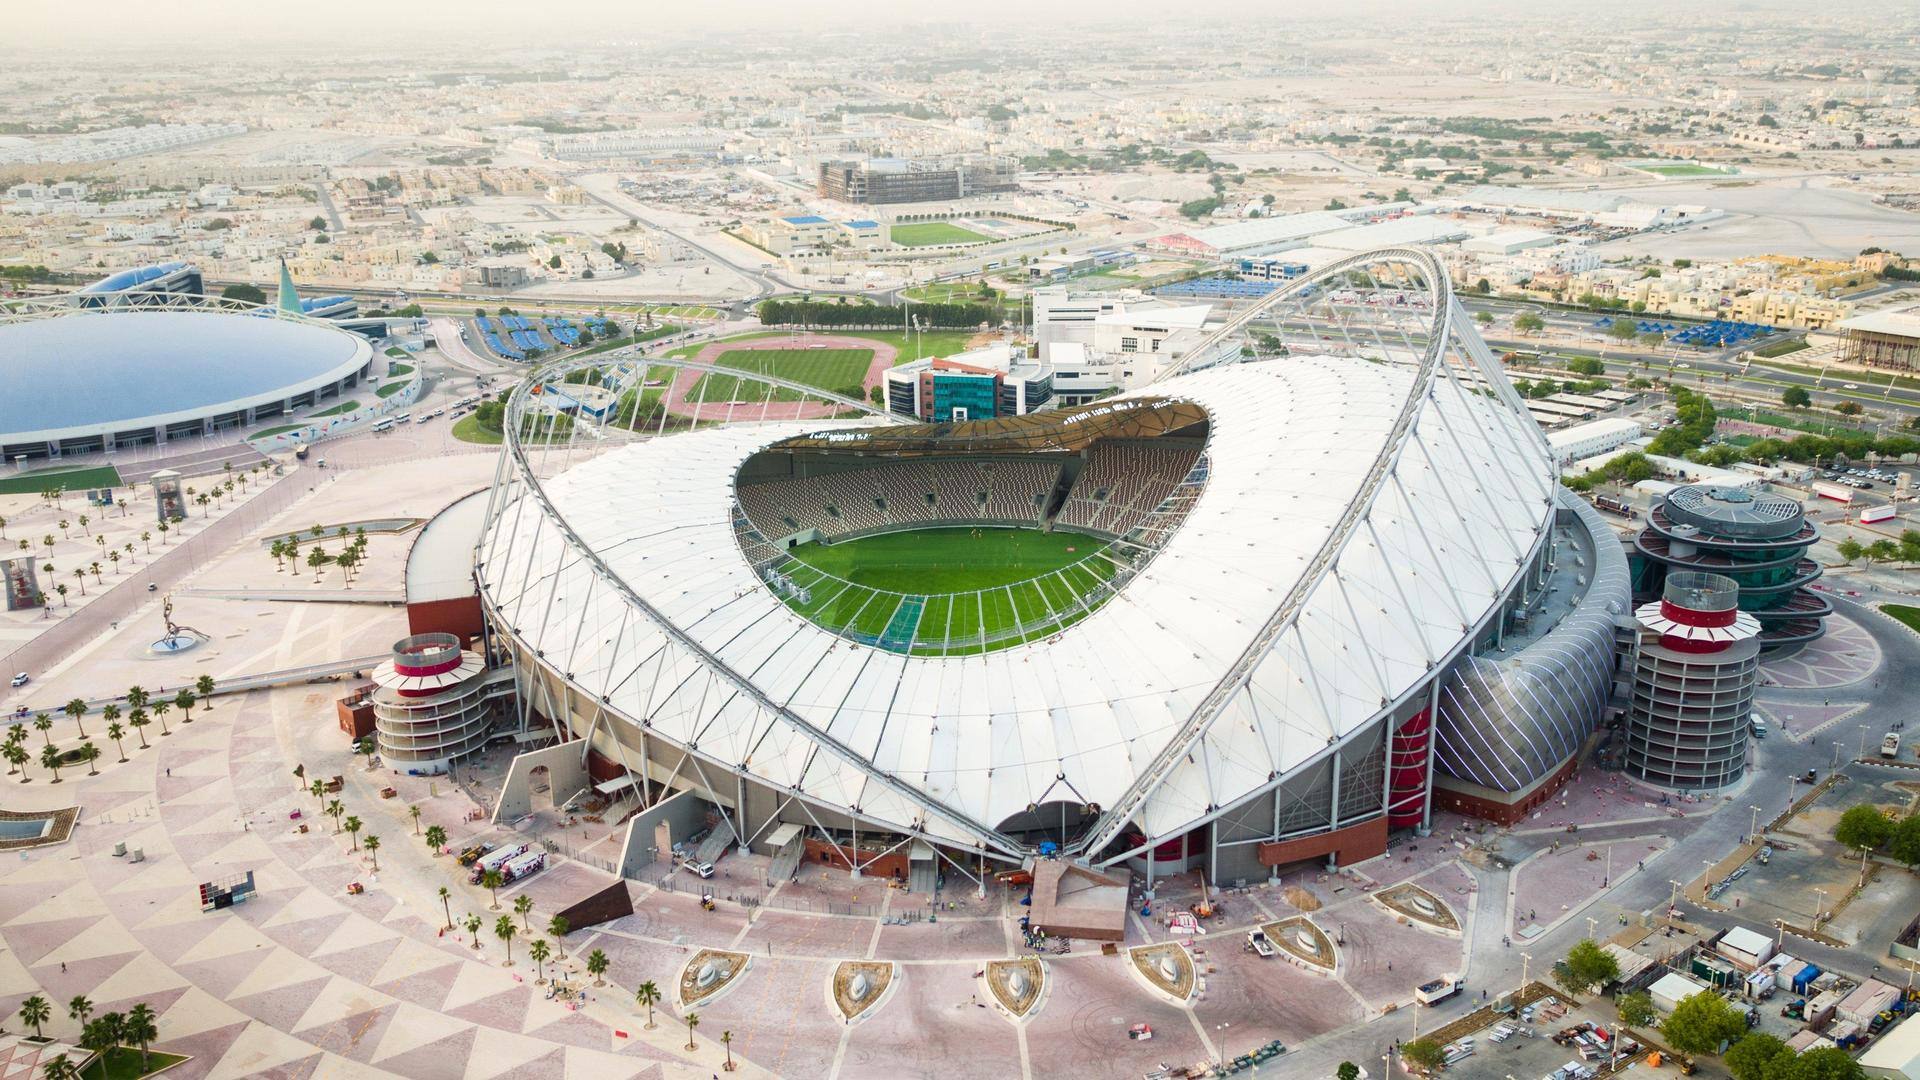 A complete guide to the FIFA World Cup 2022 stadiums